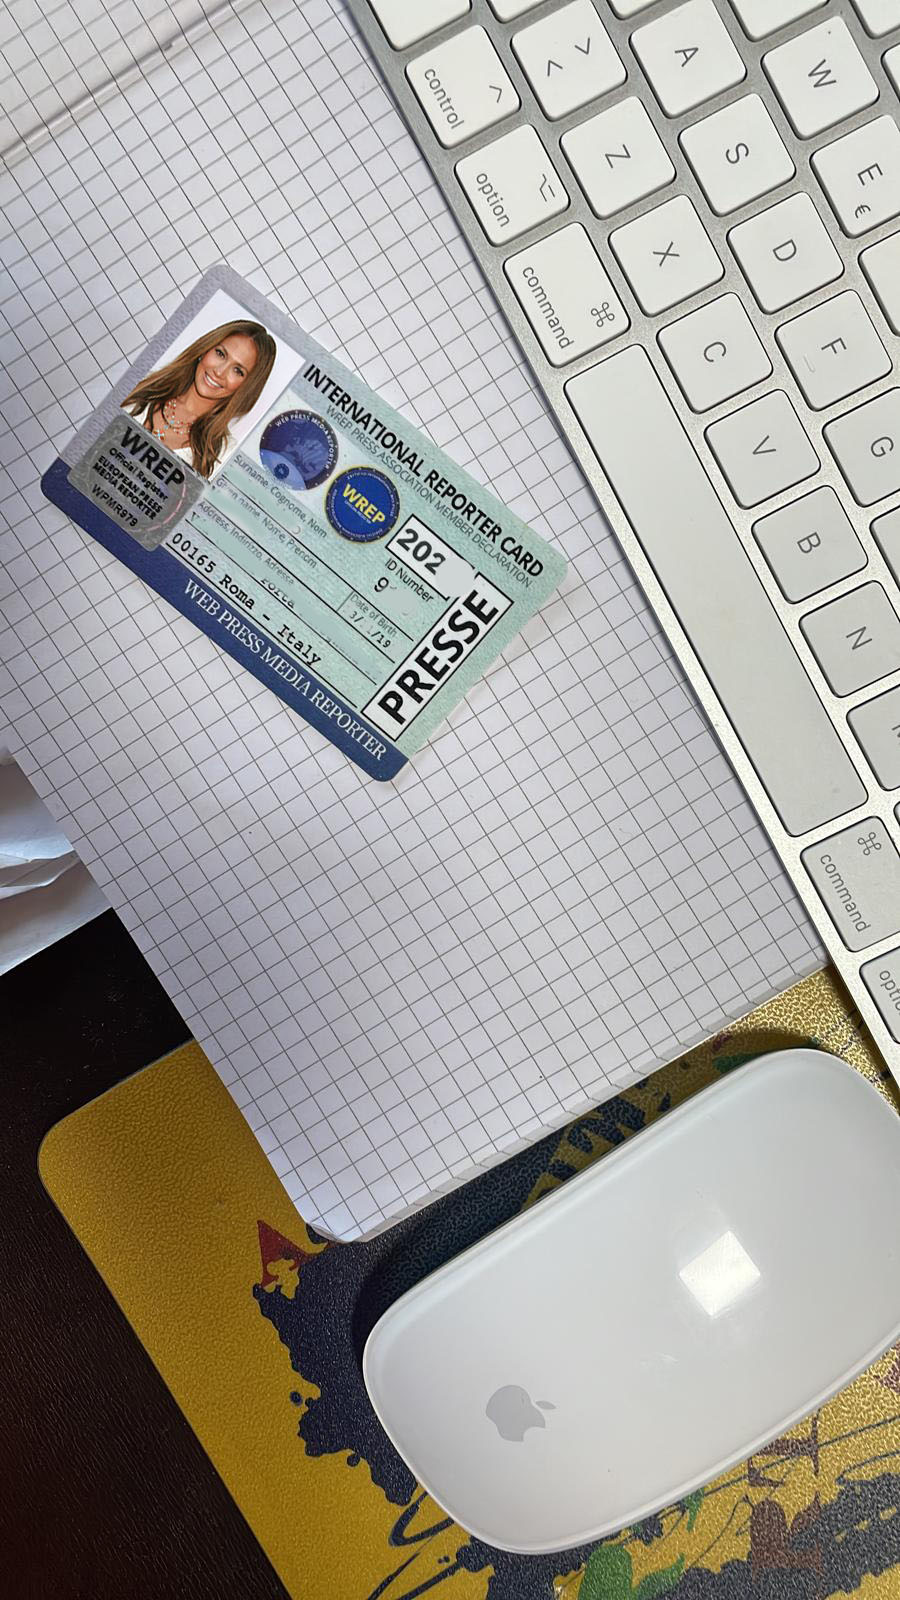 Wrep Web Reporter, identity recognition card